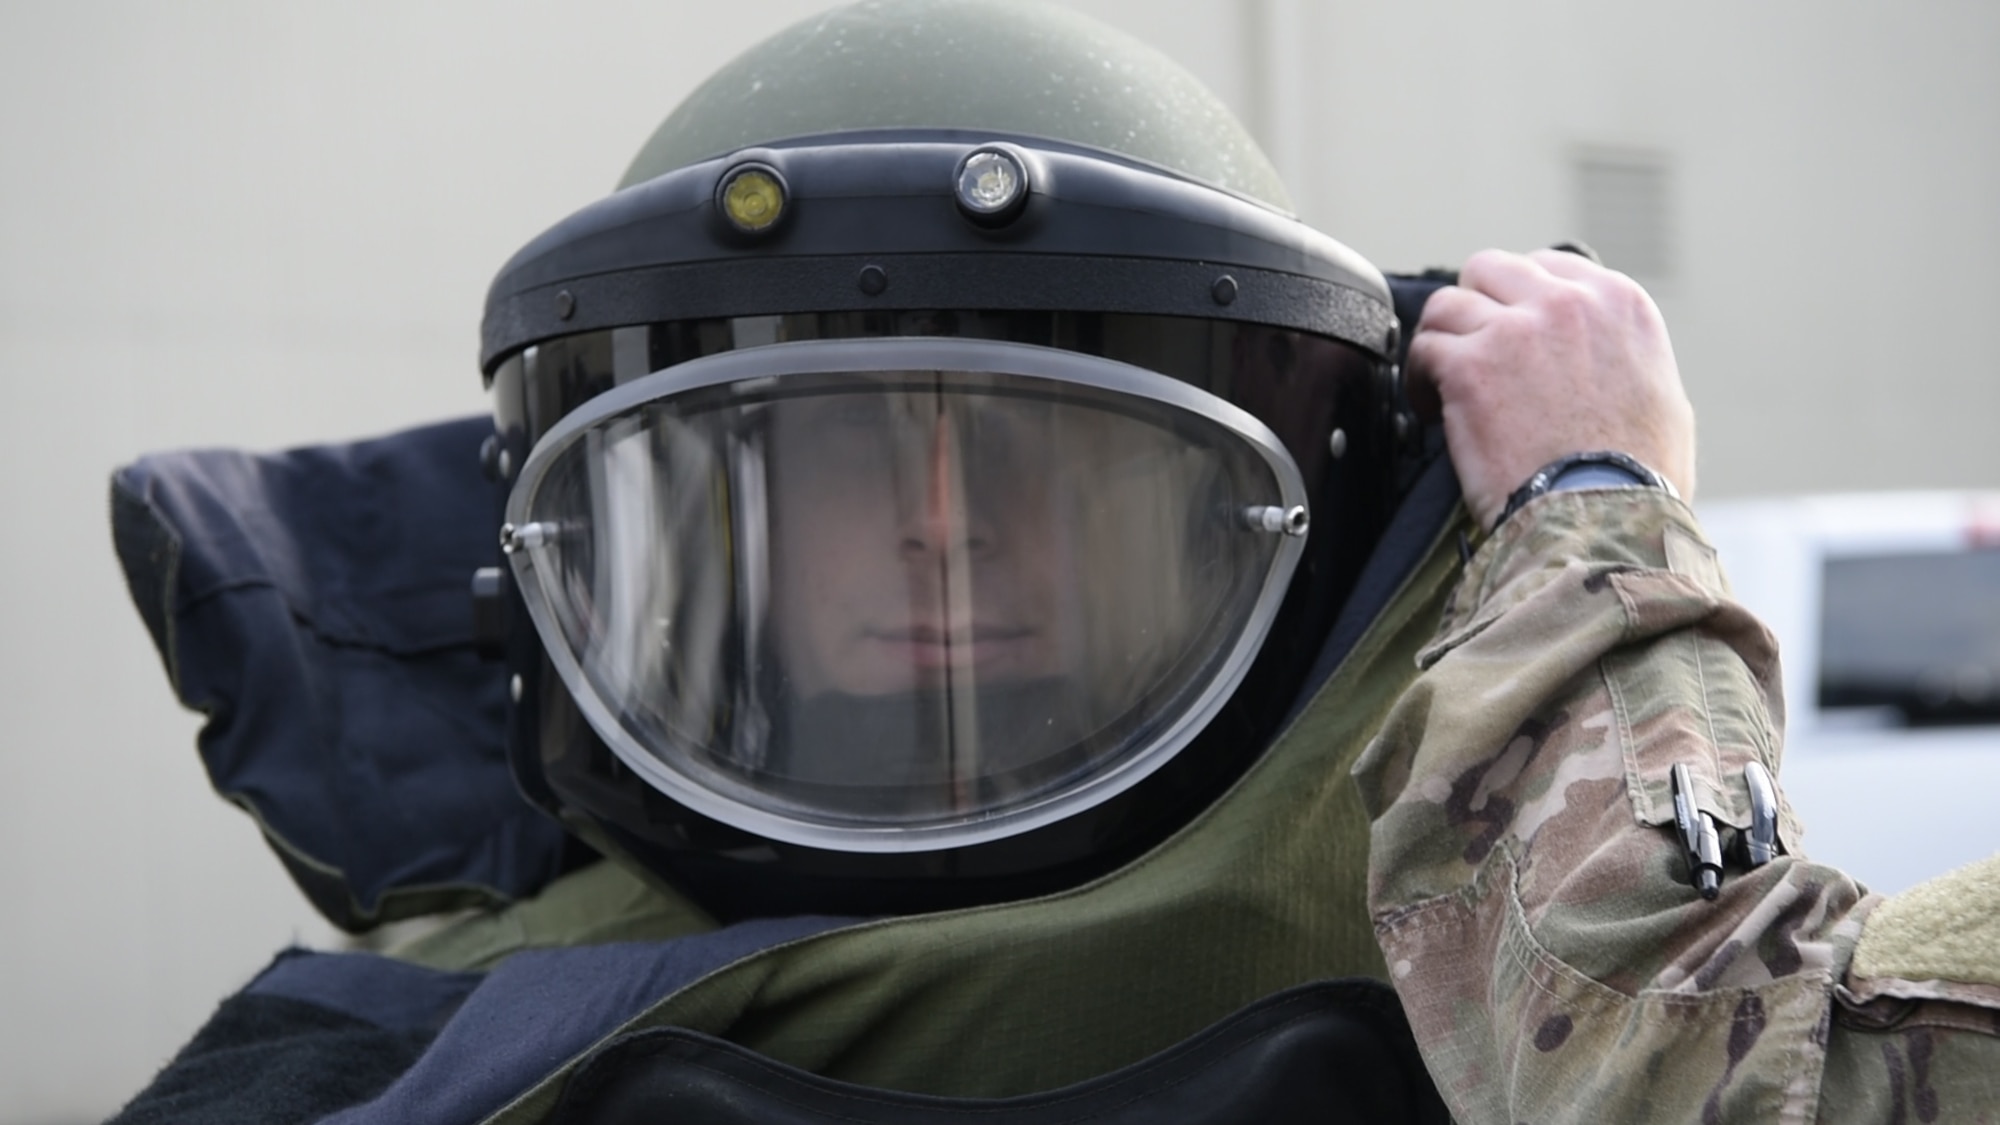 Senior Airman Jacob Gerow, 436th Civil Engineer Squadron, explosive ordnance disposal (EOD) journeyman, dons his bomb suit for his part in EOD’s improvised explosive device exercise during Prime Base Engineer Emergency Force (Prime BEEF) Day Nov. 28, 2018, at Dover Air Force Base, Del. Prime BEEF Day is a squadron-wide training day focused on maintaining and refreshing all civil engineering Airmen on readiness requirements and operational capabilities. (U.S. Photo by Airman First Class Dedan D. Dials)